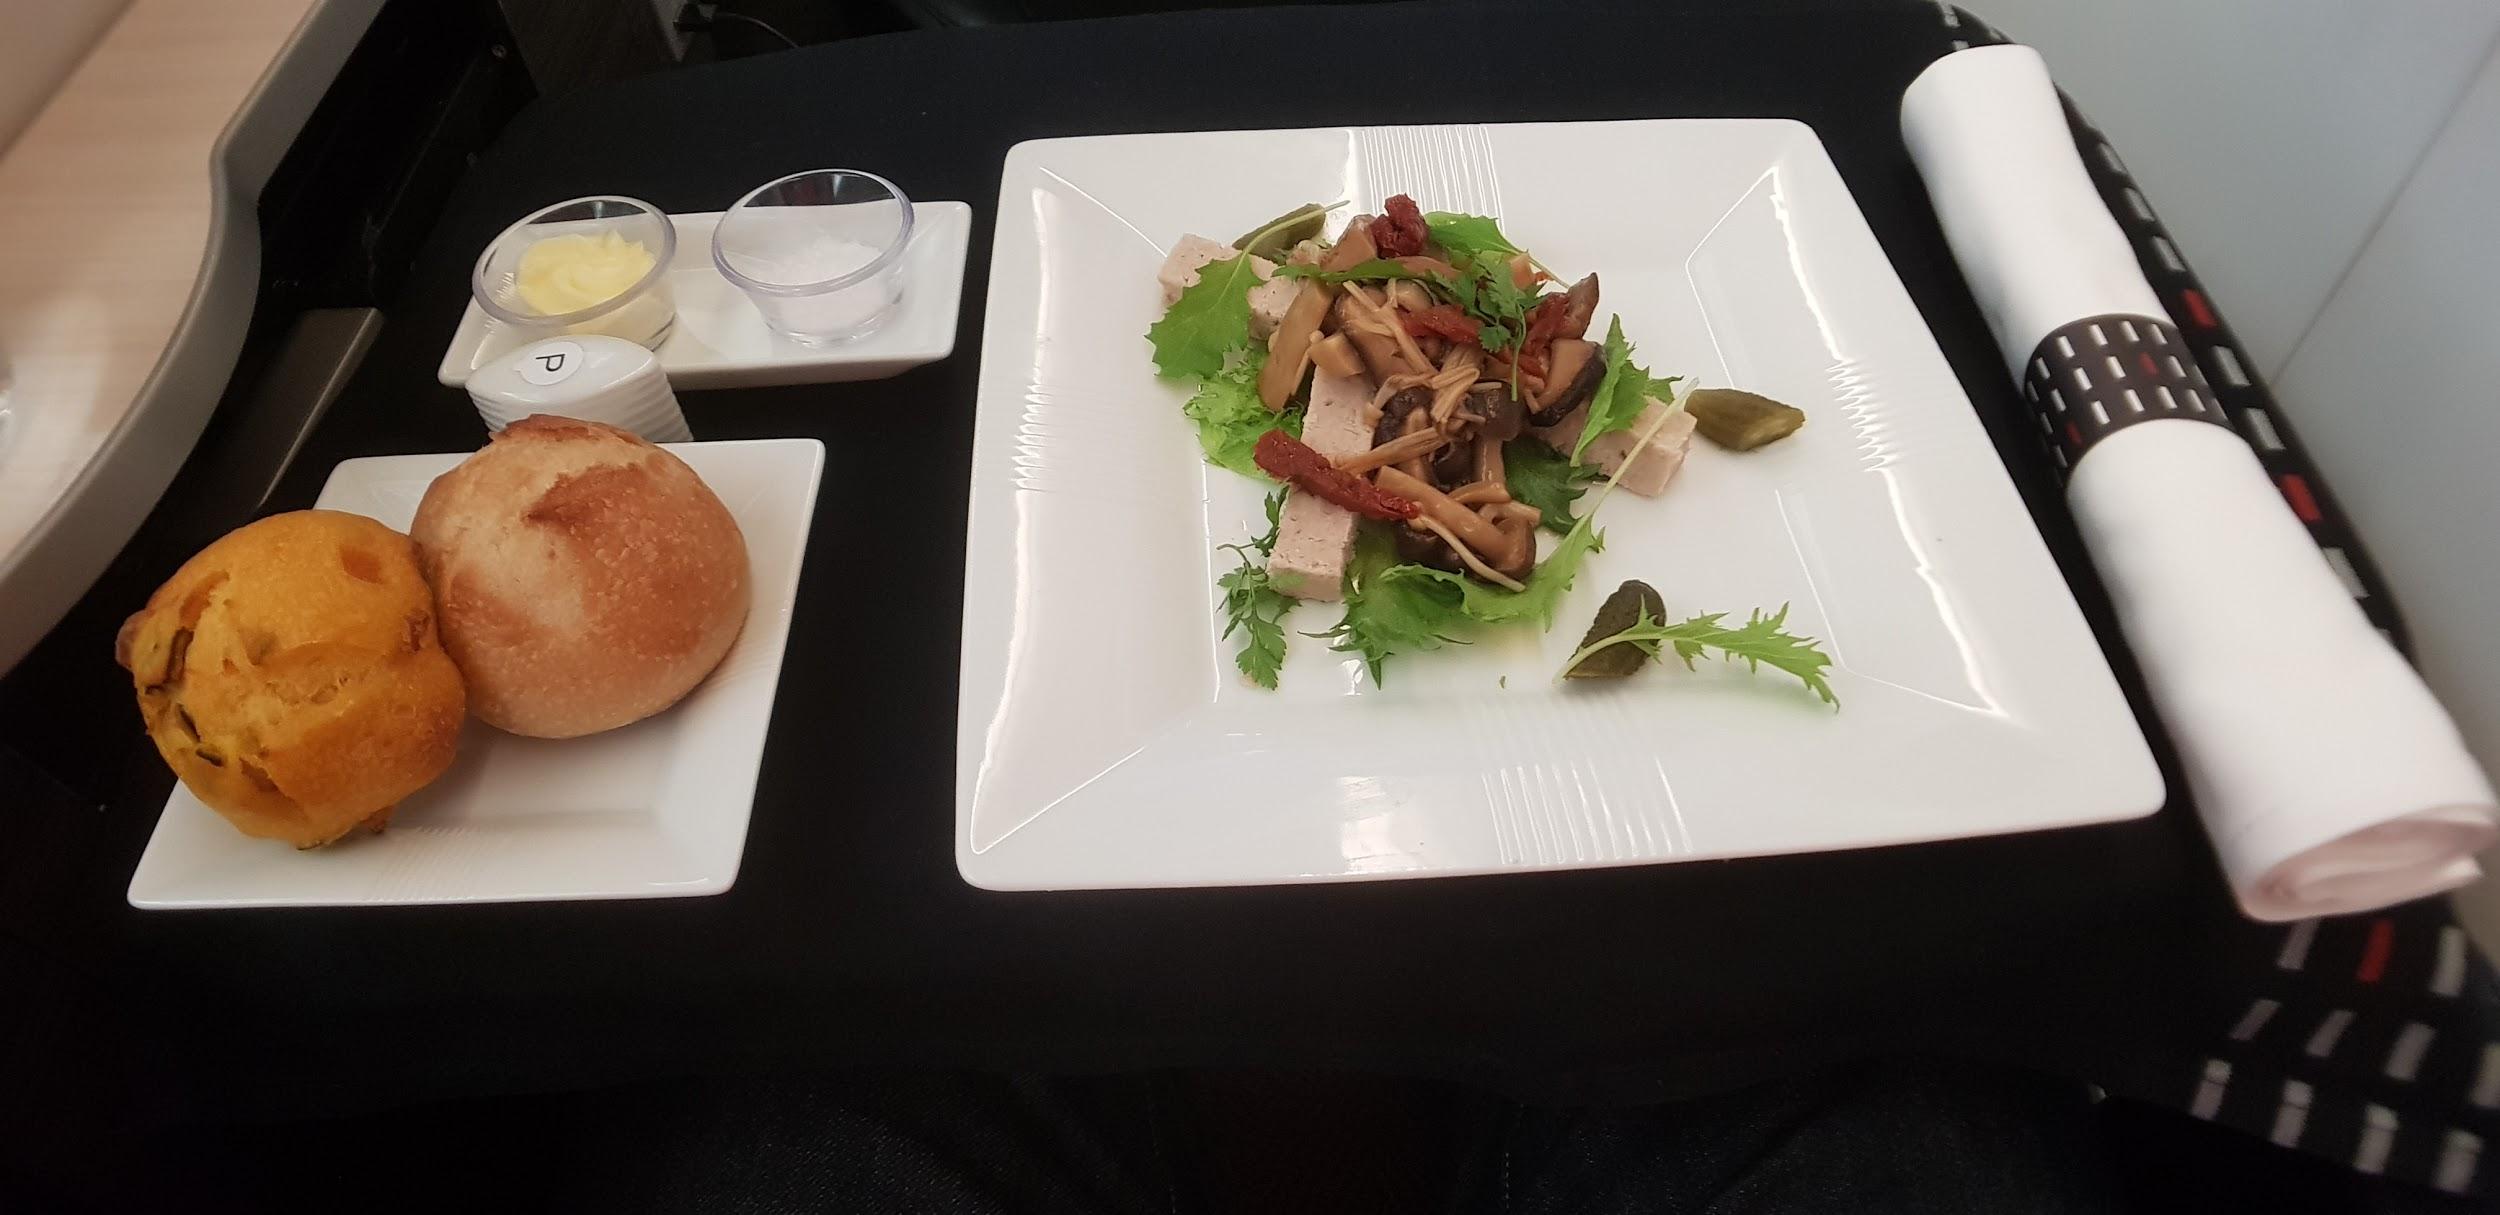 Japan Airlines Business Class meal